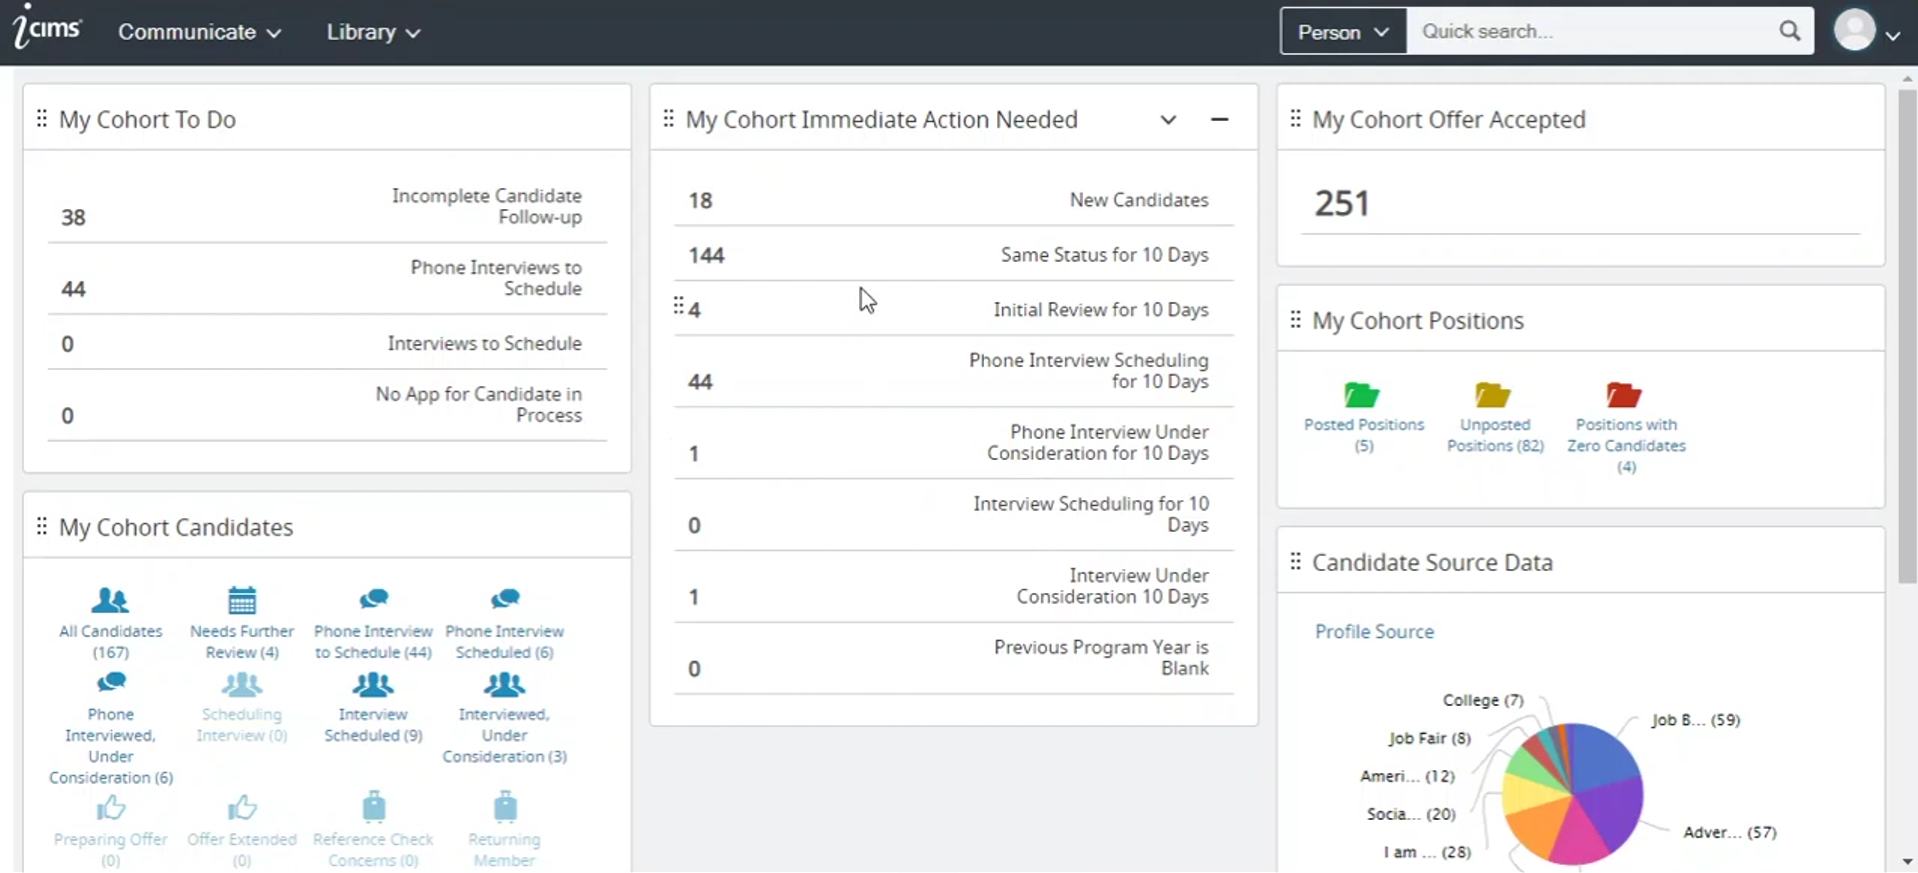 Screenshot of iCIMS Applicant Tracking System Showing Candidate Scores, Hiring Manager Feedback and Job Report